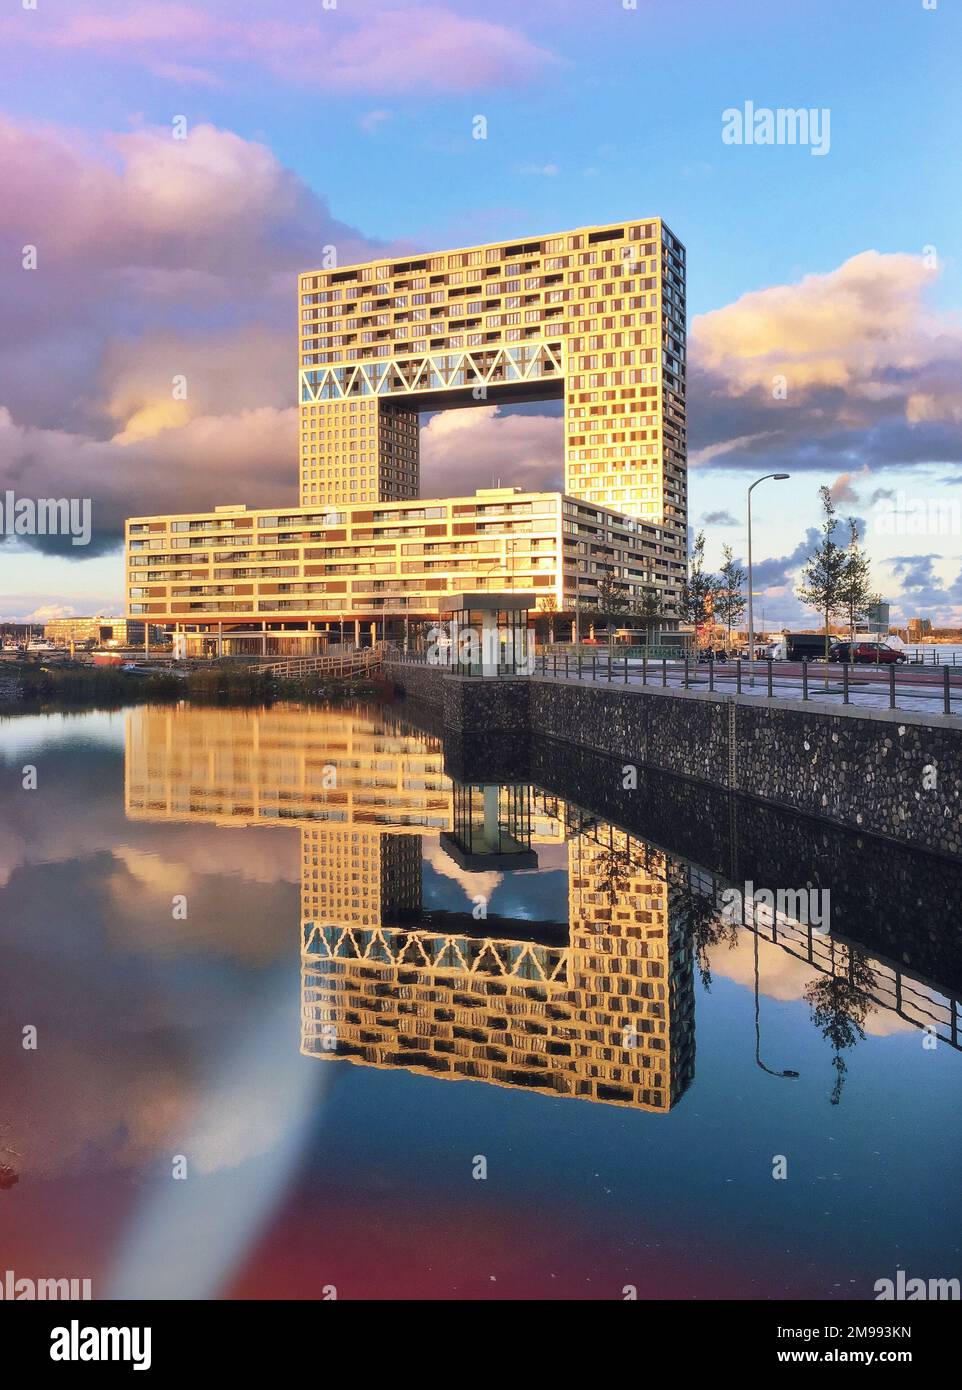 The Pontsteigergebouw reflected on the water in Amsterdam, the Netherlands. A modern architectural landmark on the waterfront. Stock Photo